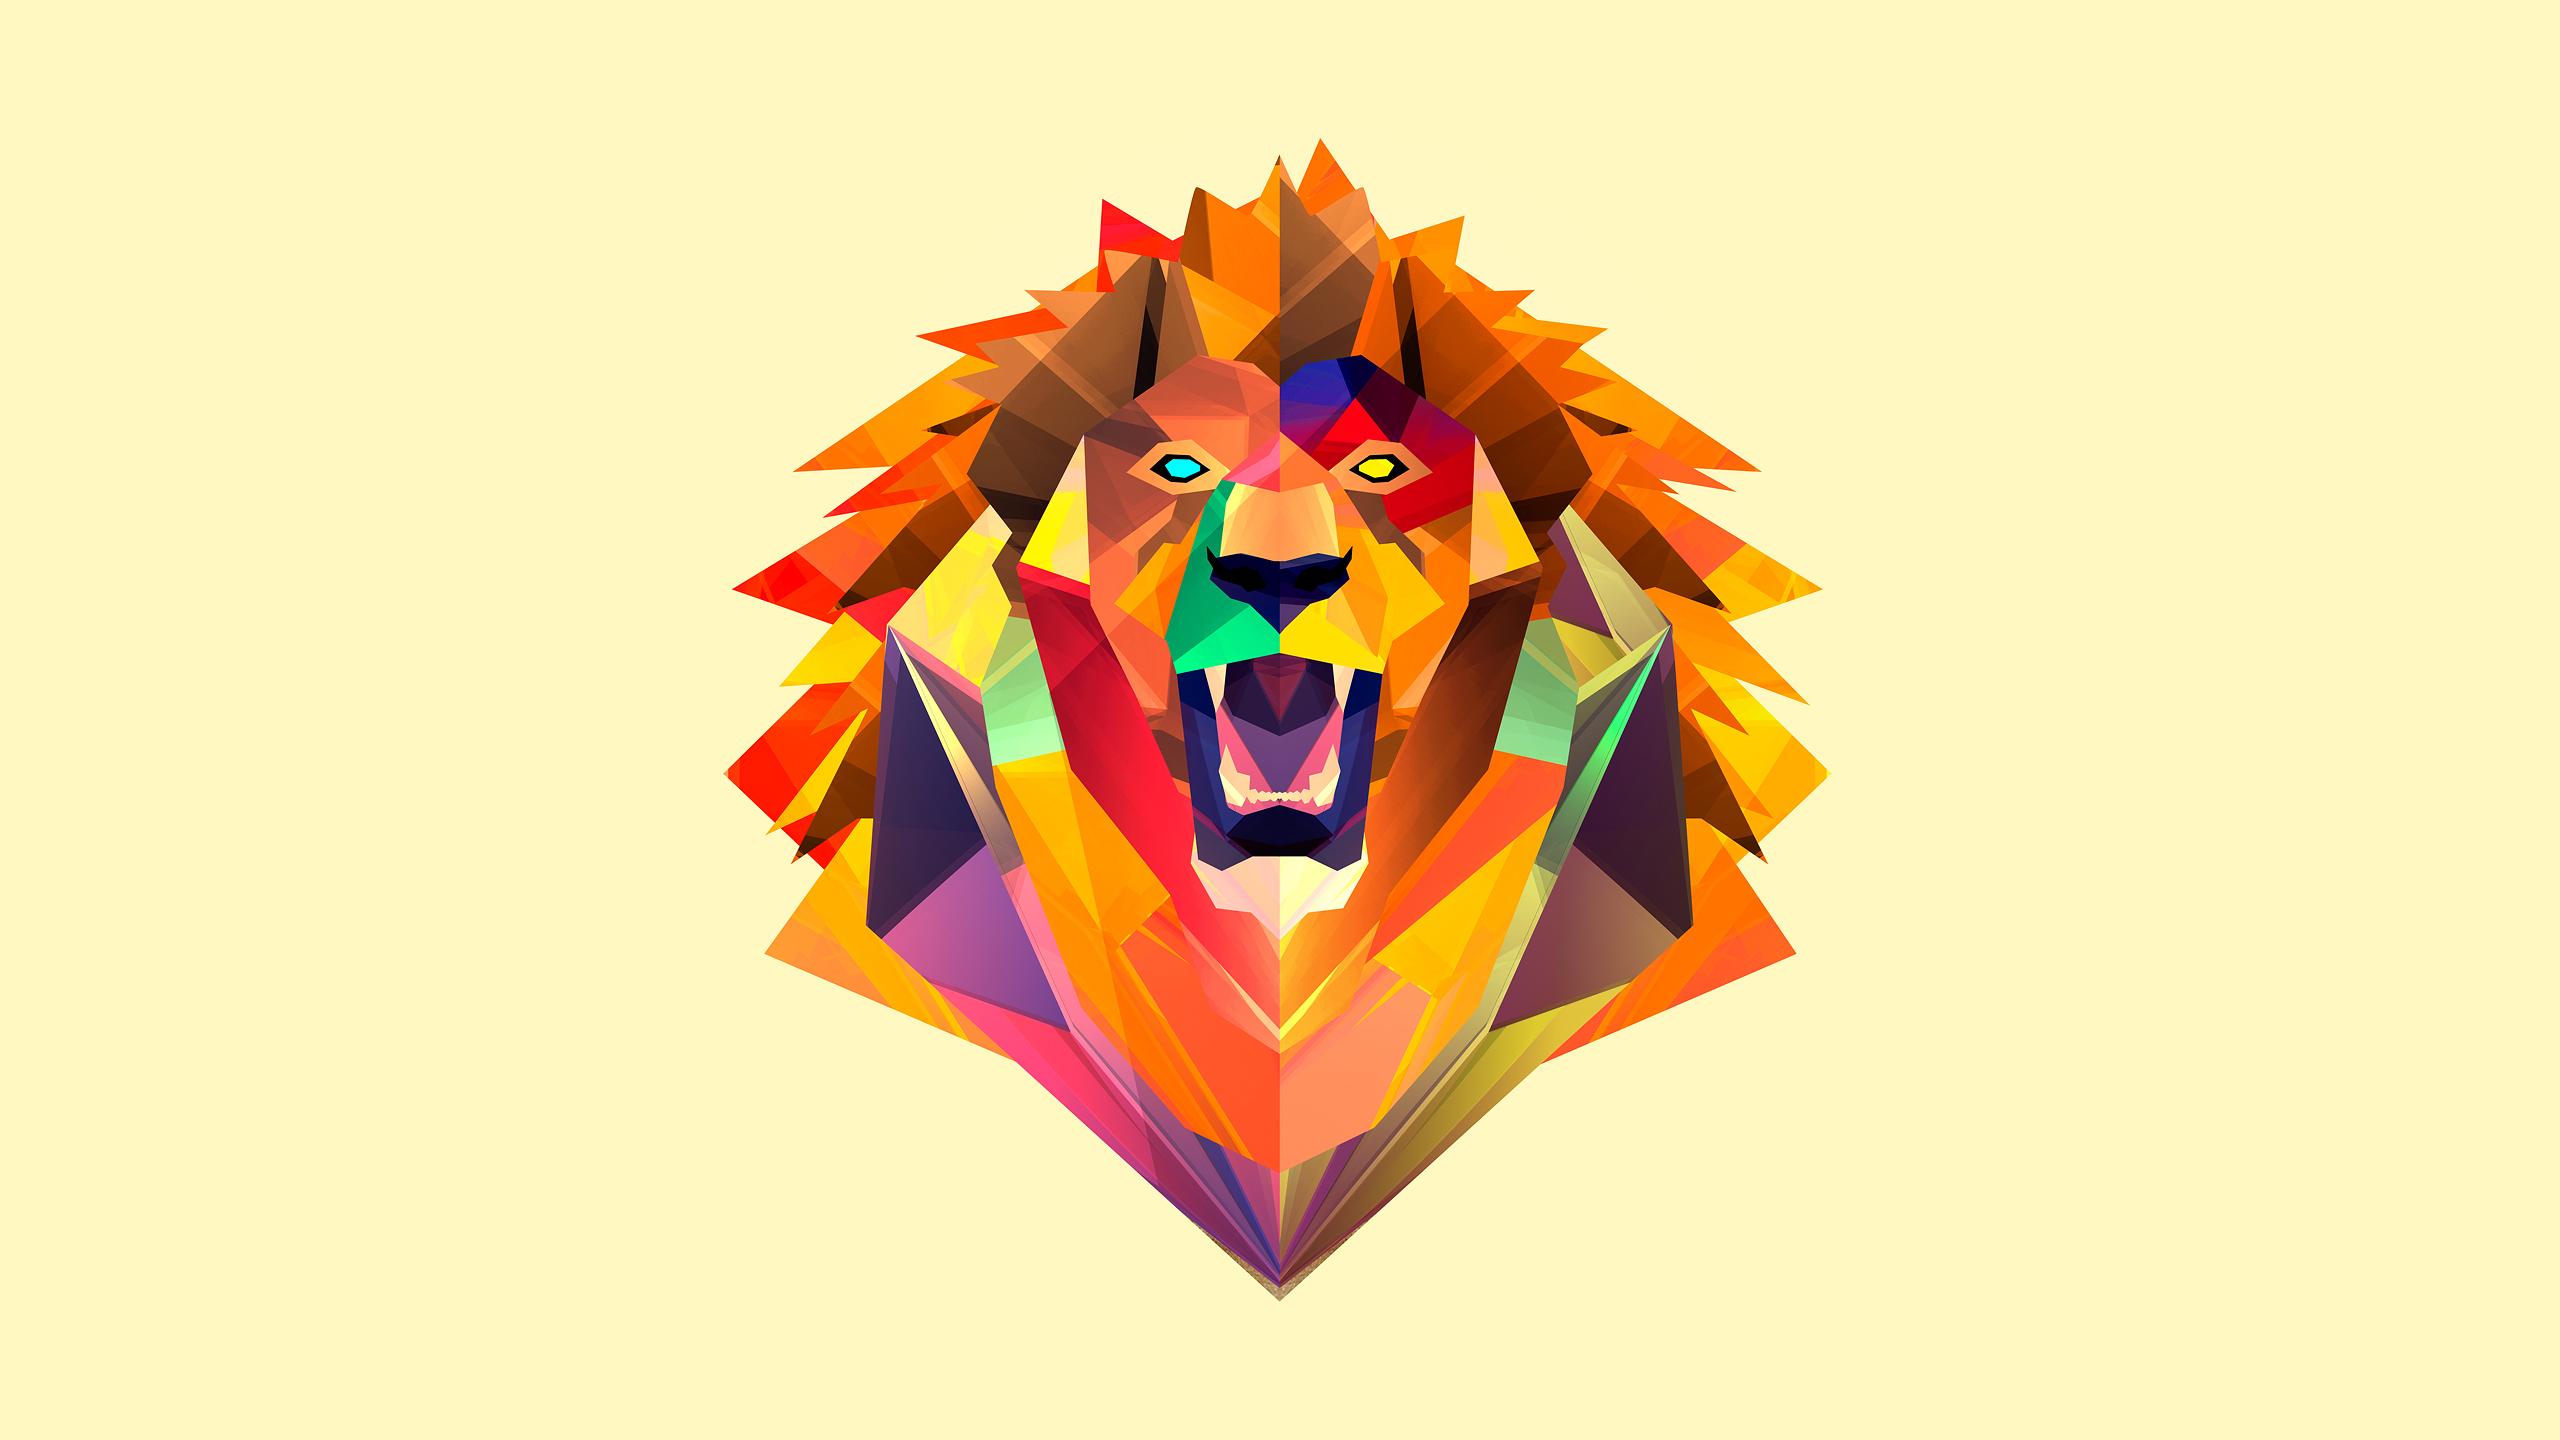 Free Download Abstract Lion Wallpaper Sf Wallpaper 2560x1440 For Your Desktop Mobile Tablet Explore 24 Abstract Lion Wallpapers Abstract Lion Wallpapers Lion Wallpapers Lion Wallpaper